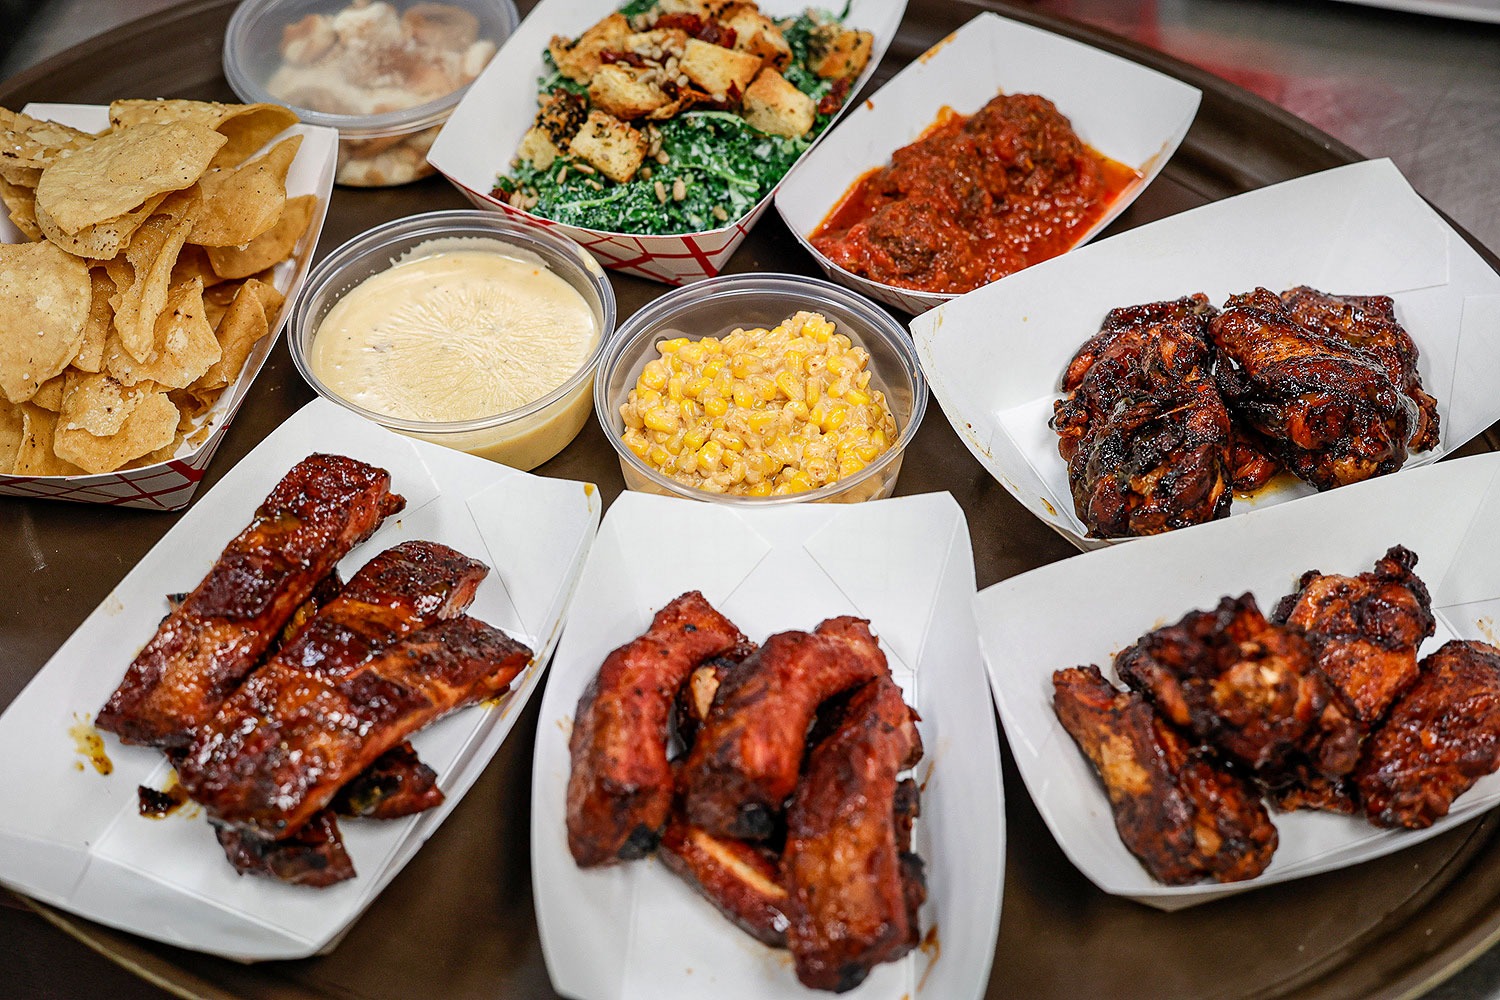 Barbecue and sides from Heffer BBQ